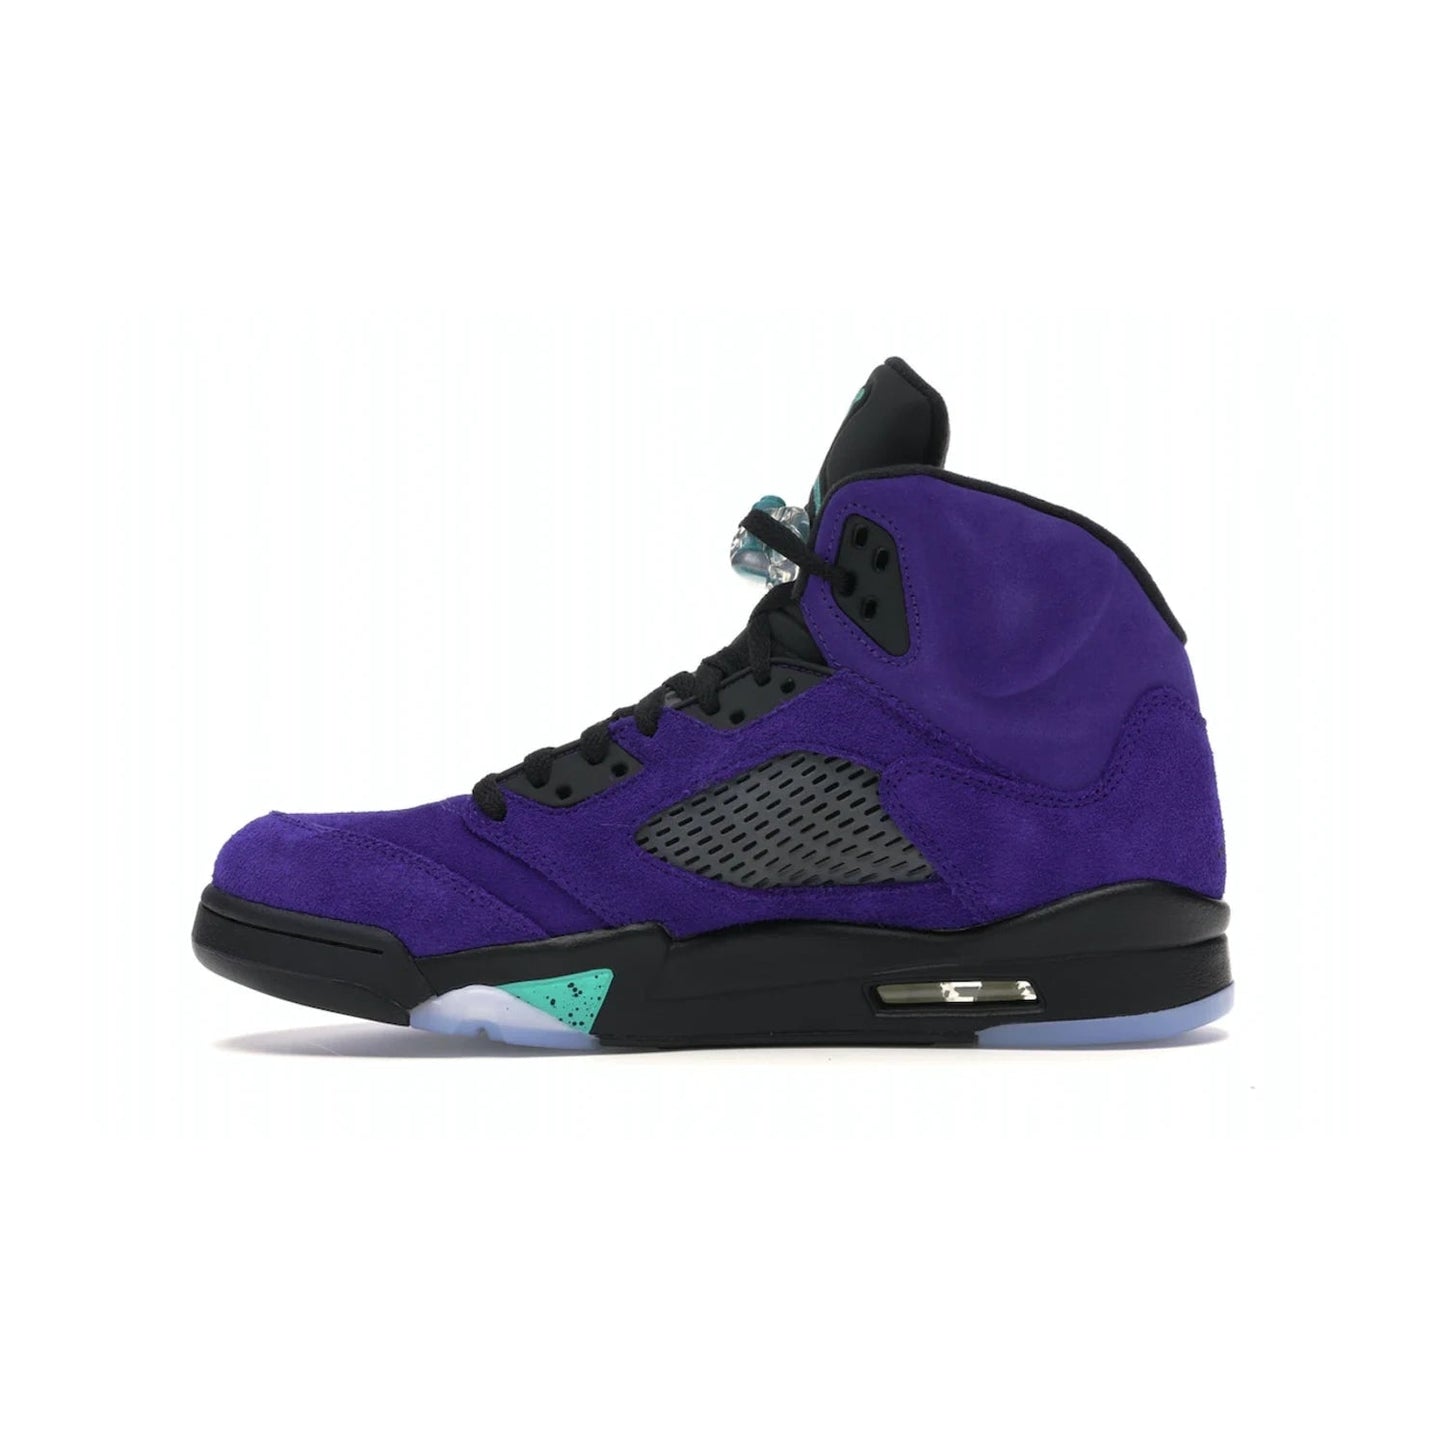 Jordan 5 Retro Alternate Grape - Image 19 - Only at www.BallersClubKickz.com - Bring the classic Jordan 5 Retro Alternate Grape to your sneaker collection! Featuring a purple suede upper, charcoal underlays, green detailing, and an icy and green outsole. Releasing for the first time since 1990, don't miss this chance to add a piece of sneaker history to your collection.